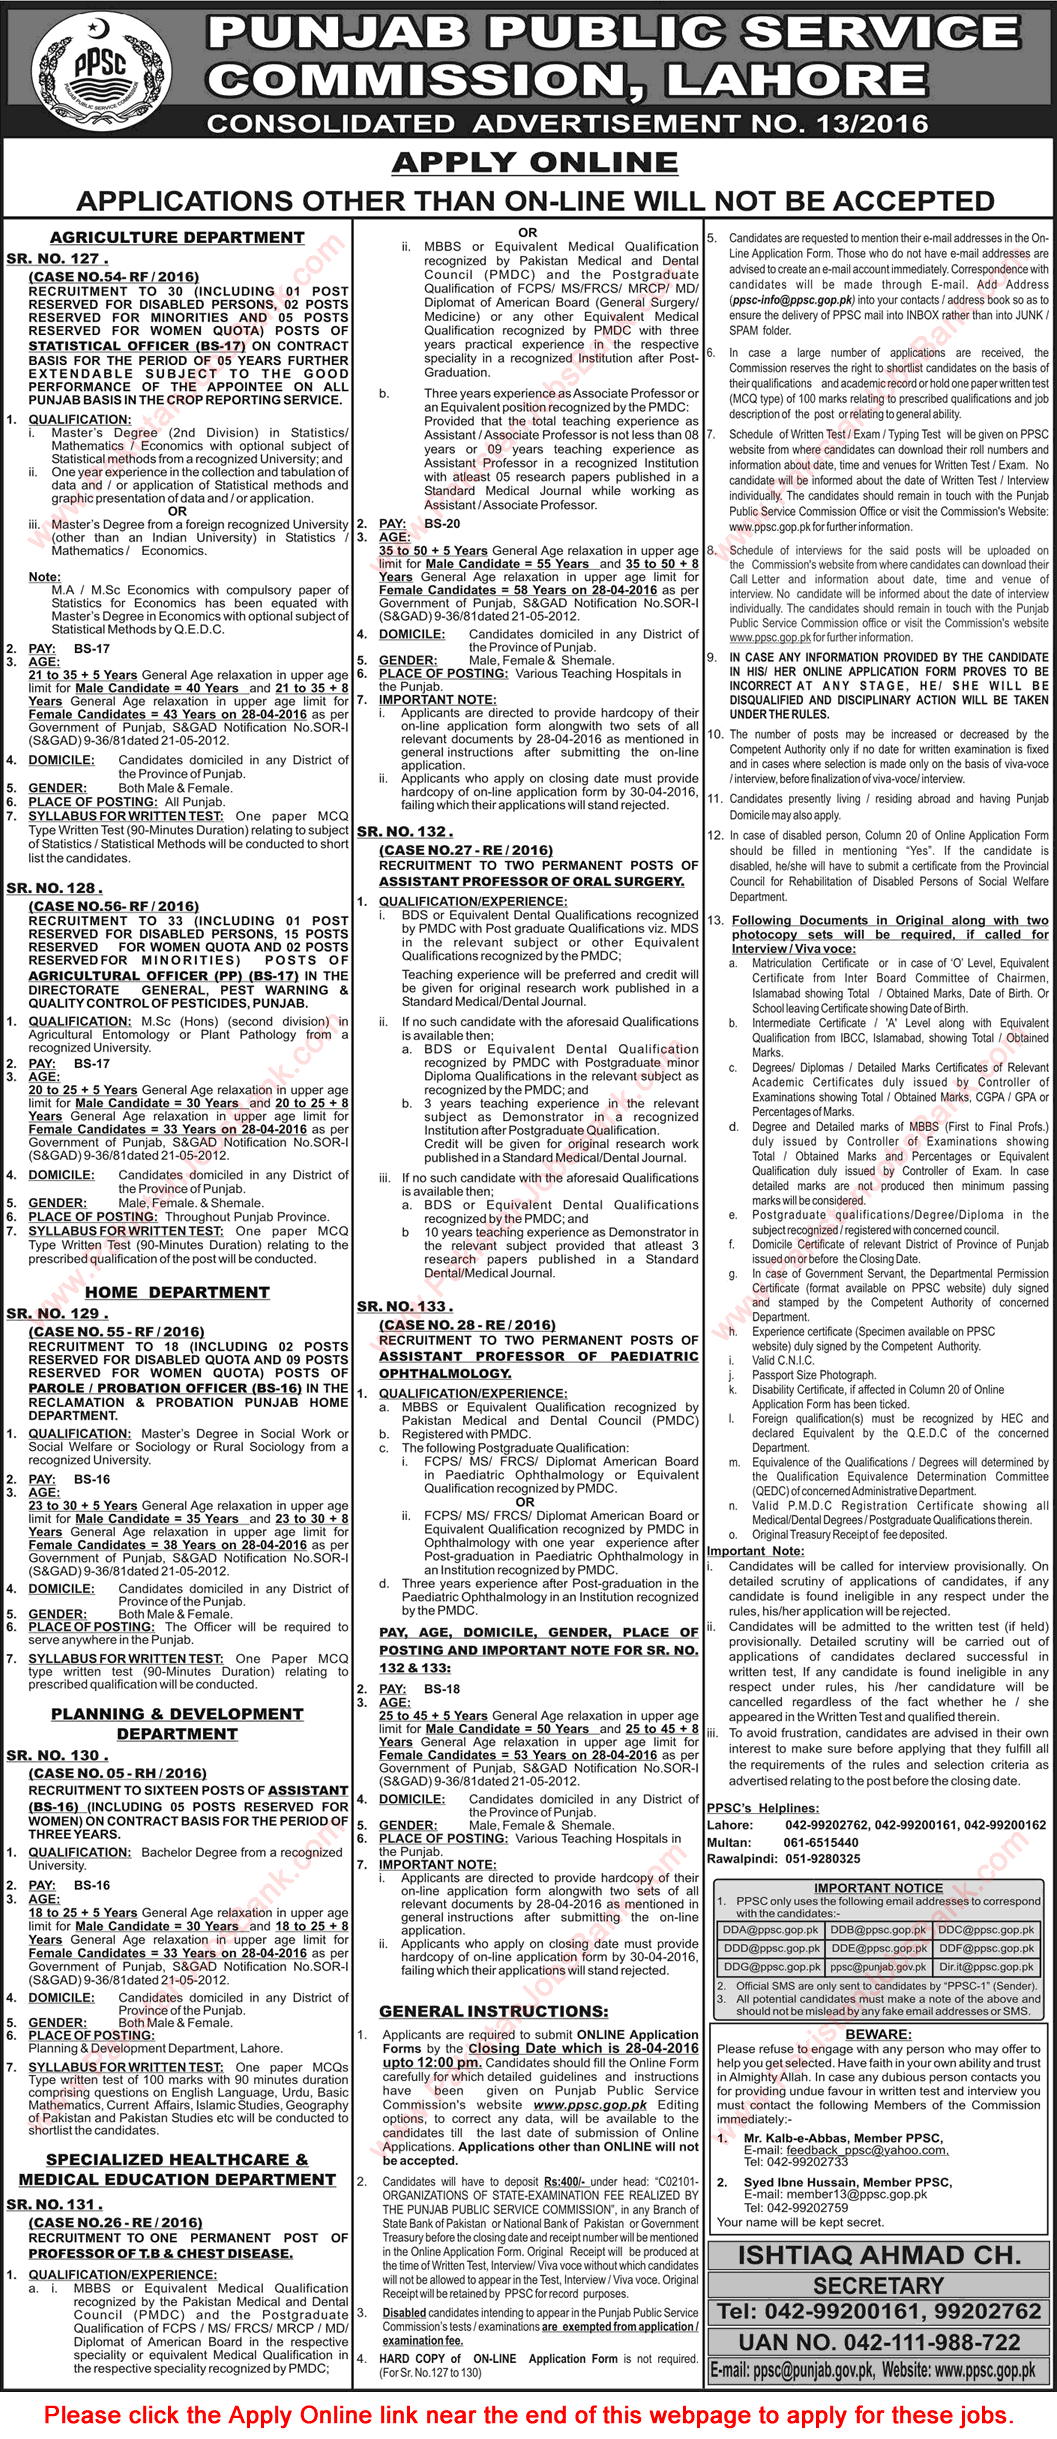 PPSC Jobs April 2016 Consolidated Advertisement No 13/2016 Apply Online Latest